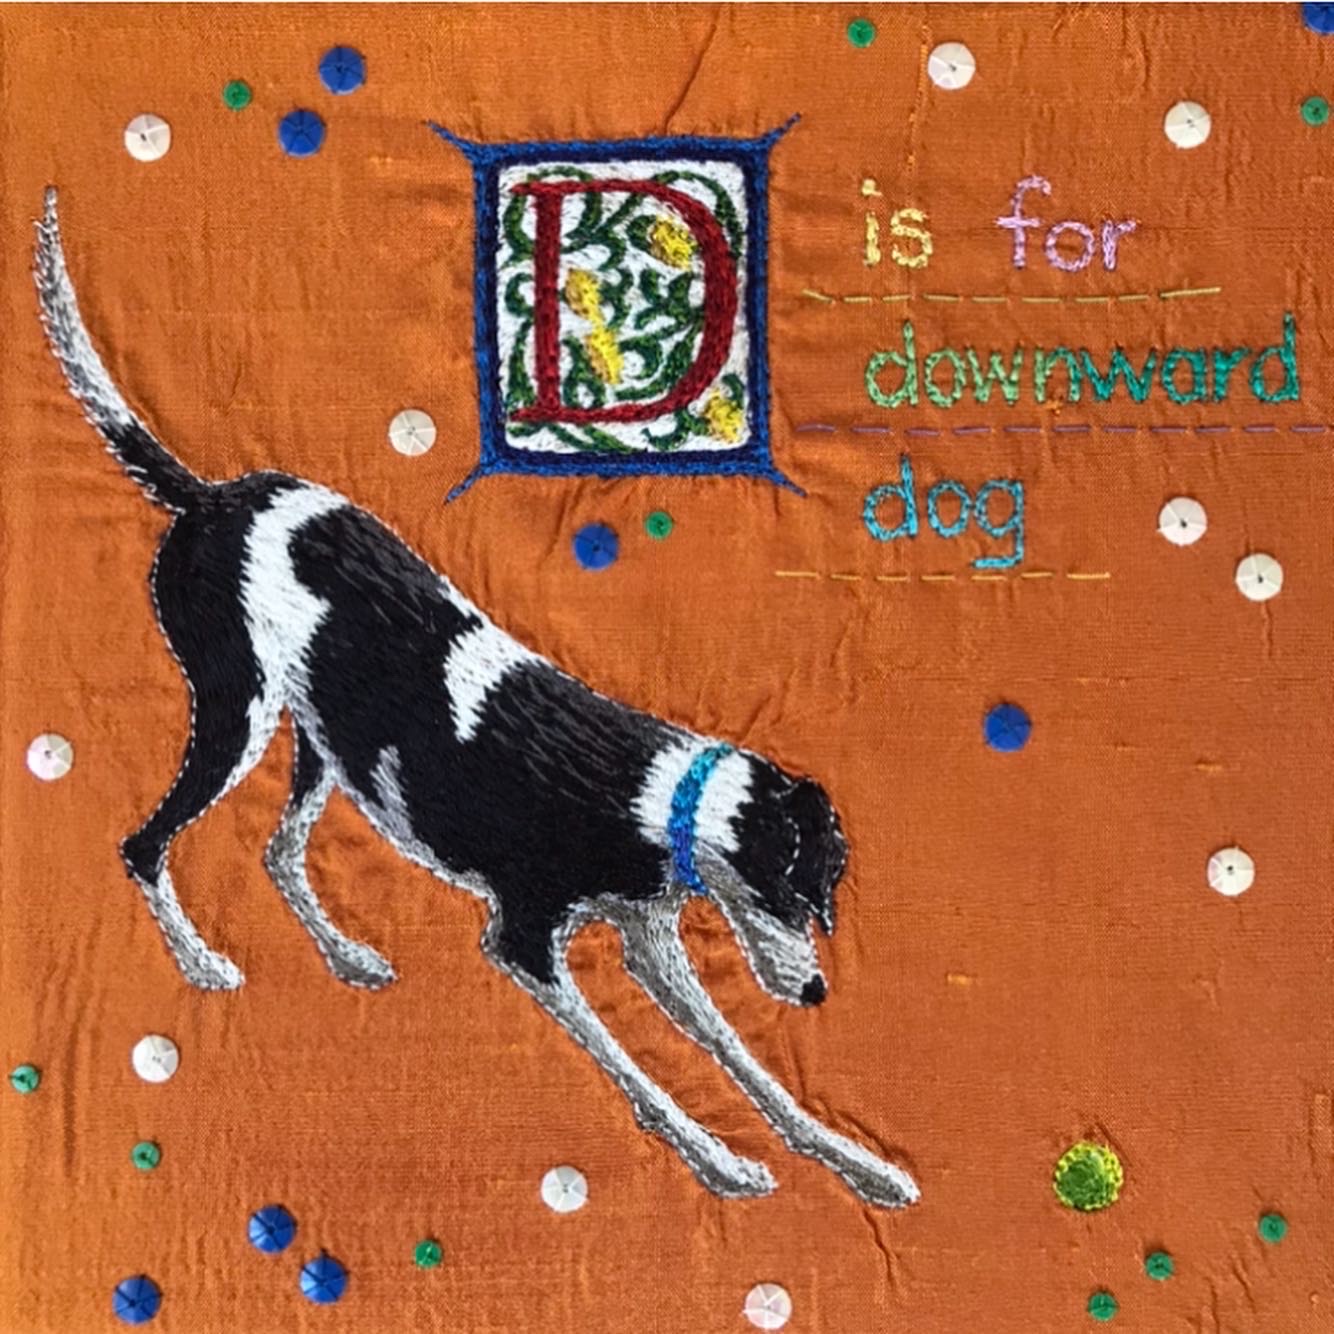 D is for Downward dog by Aileen  Johnston